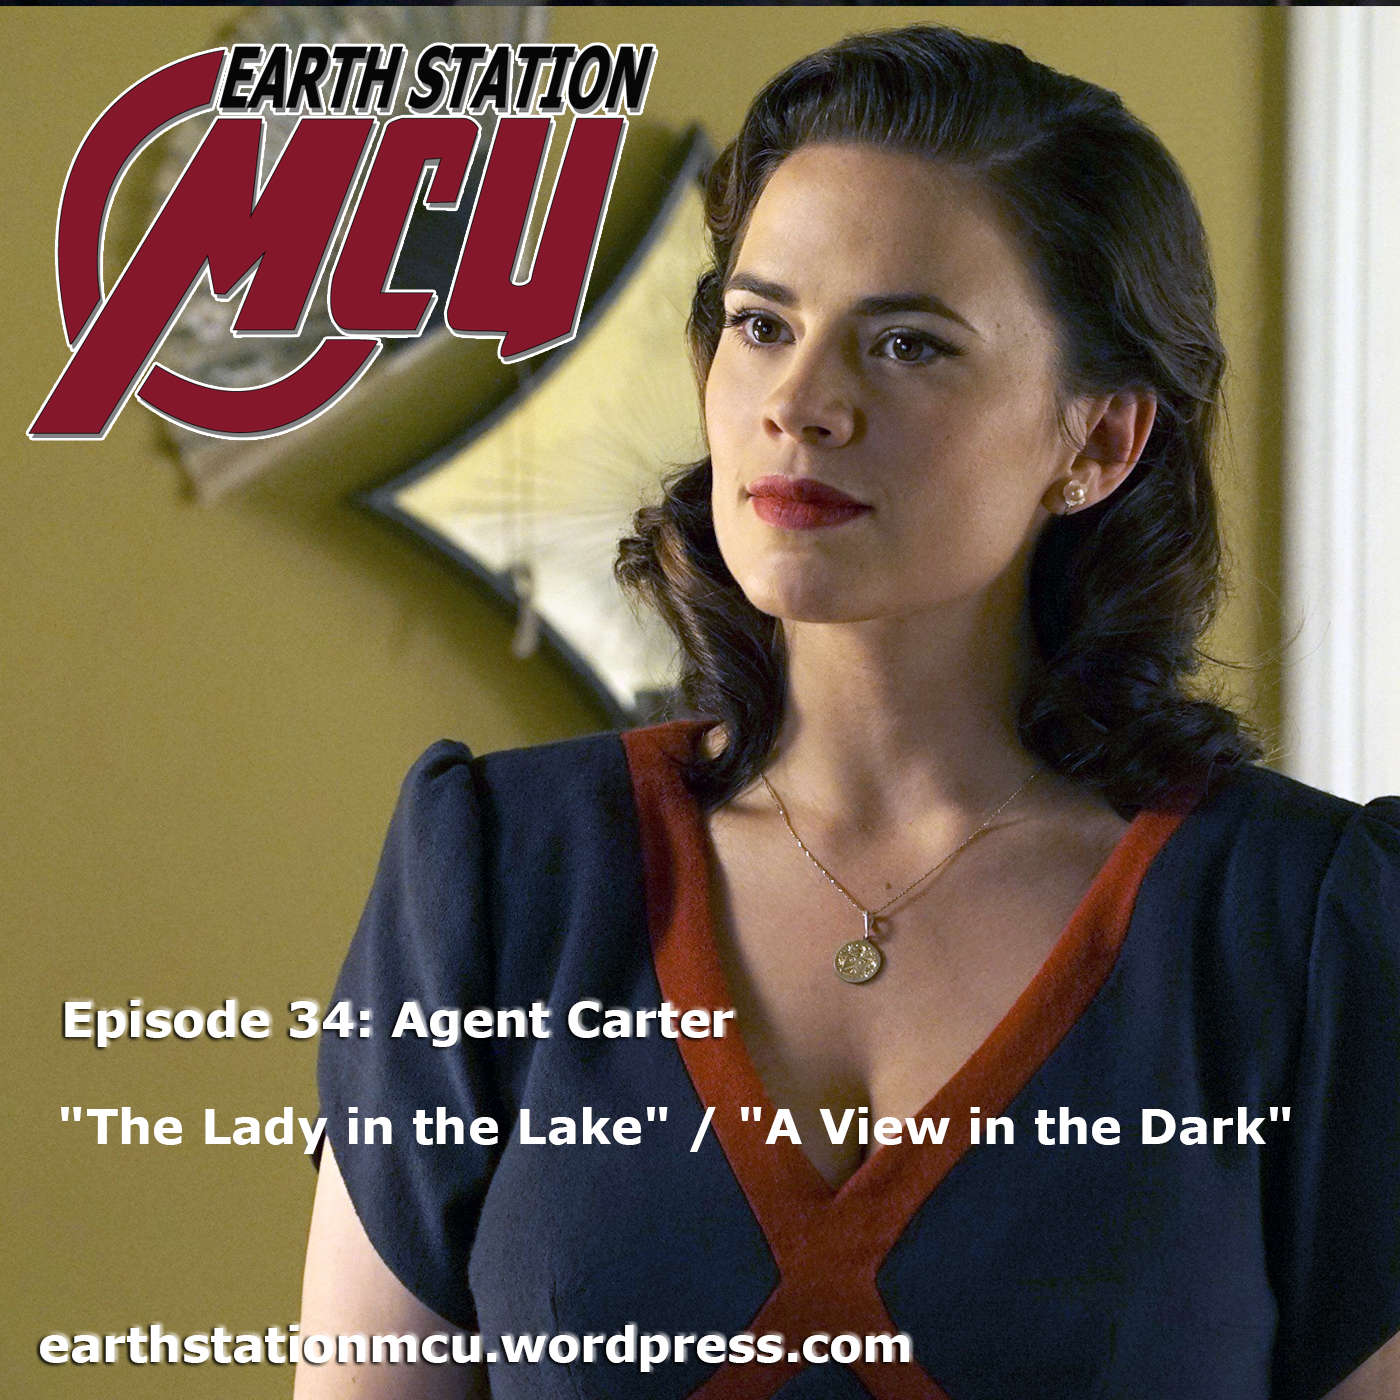 Earth Station MCU Episode 34: Agent Carter, ”Lady in the Lake”